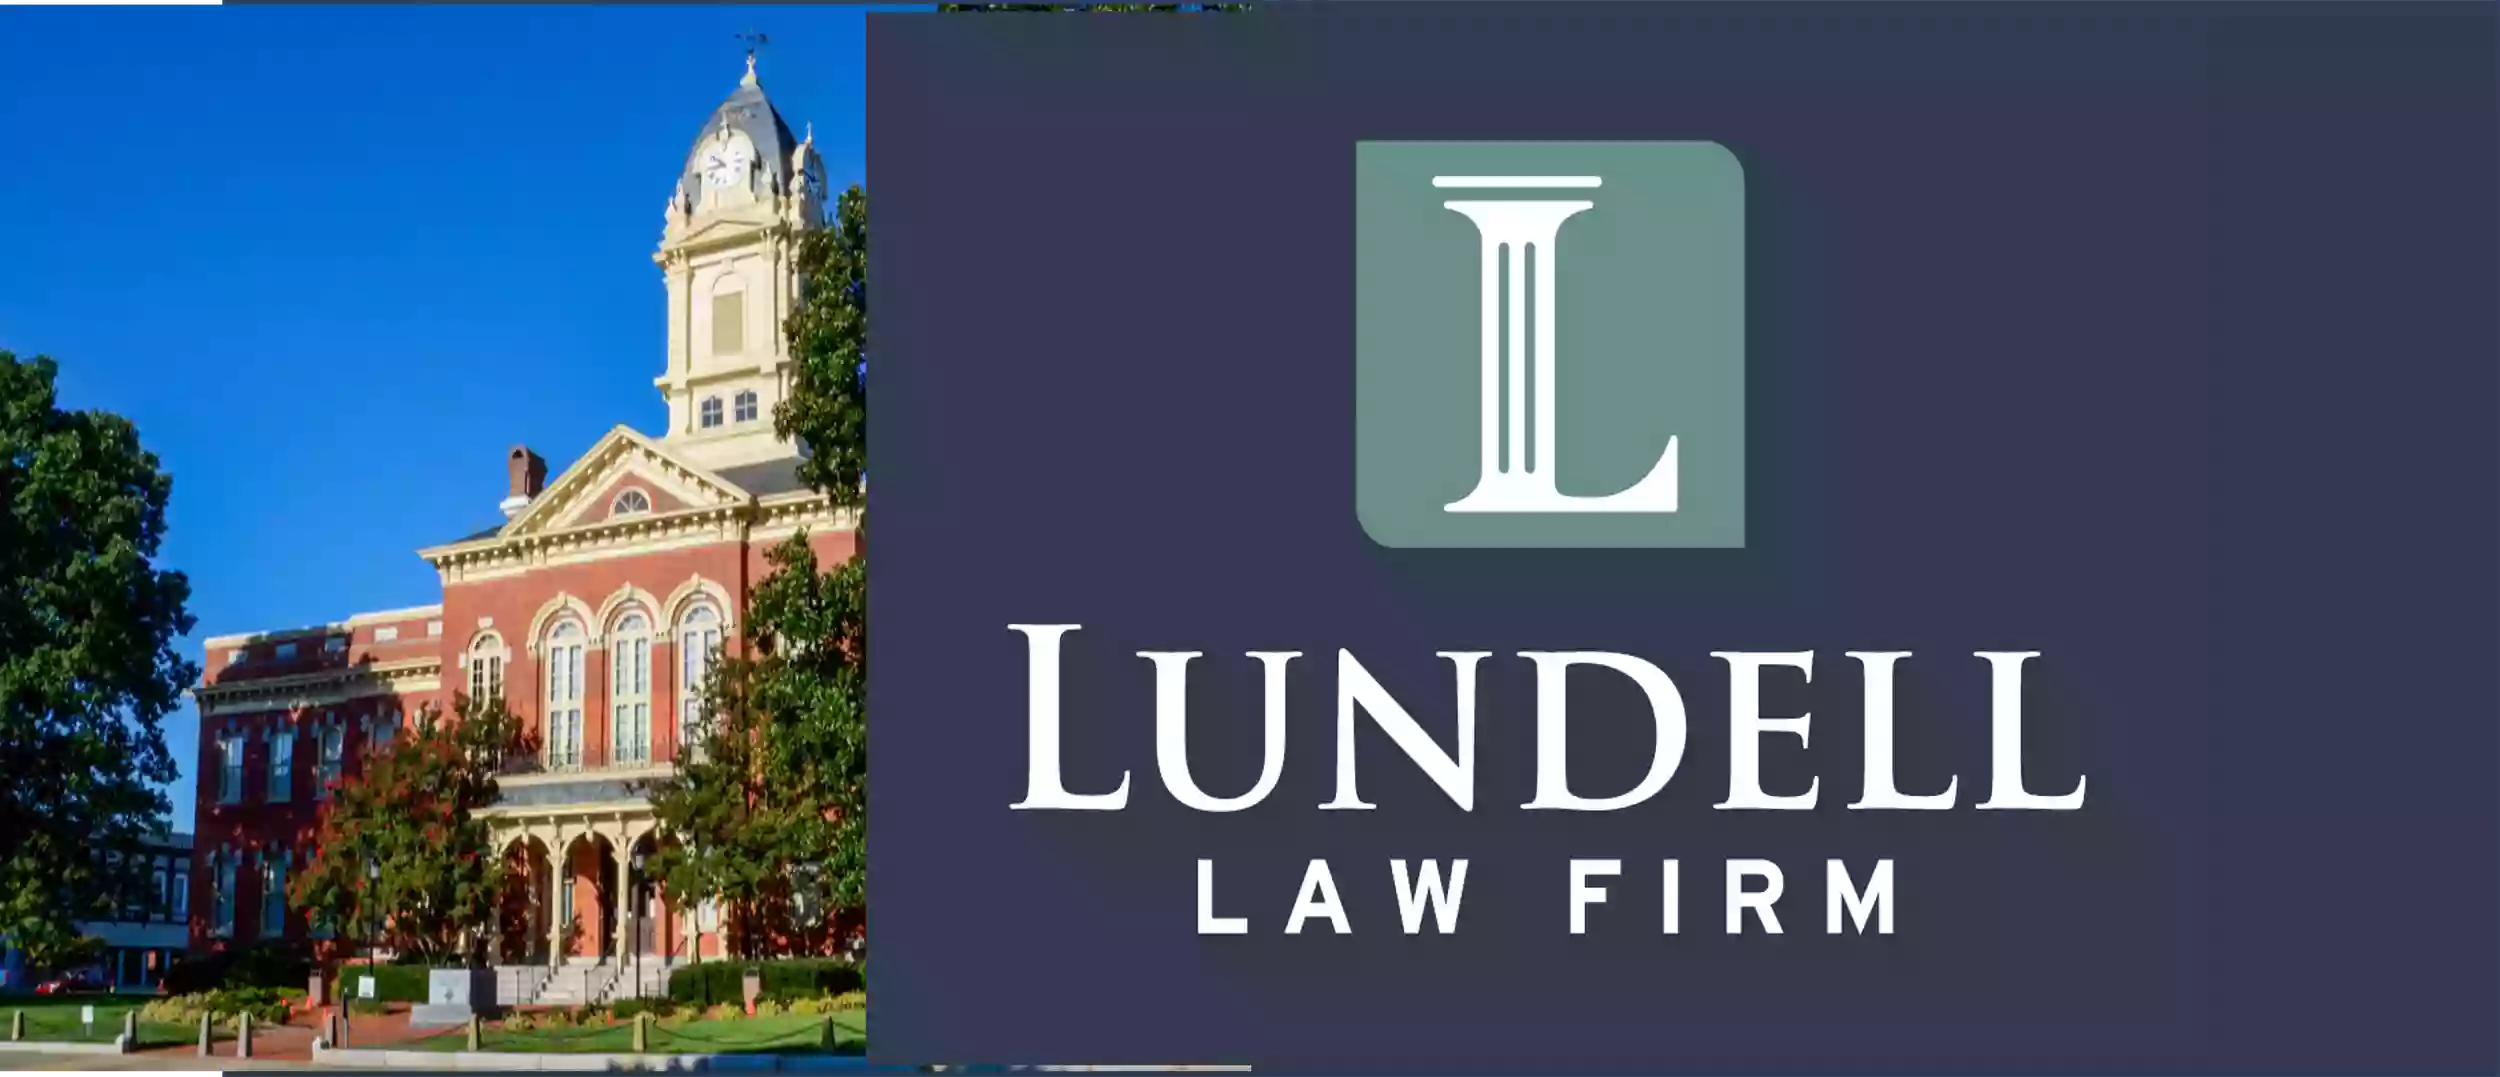 Lundell Law Firm